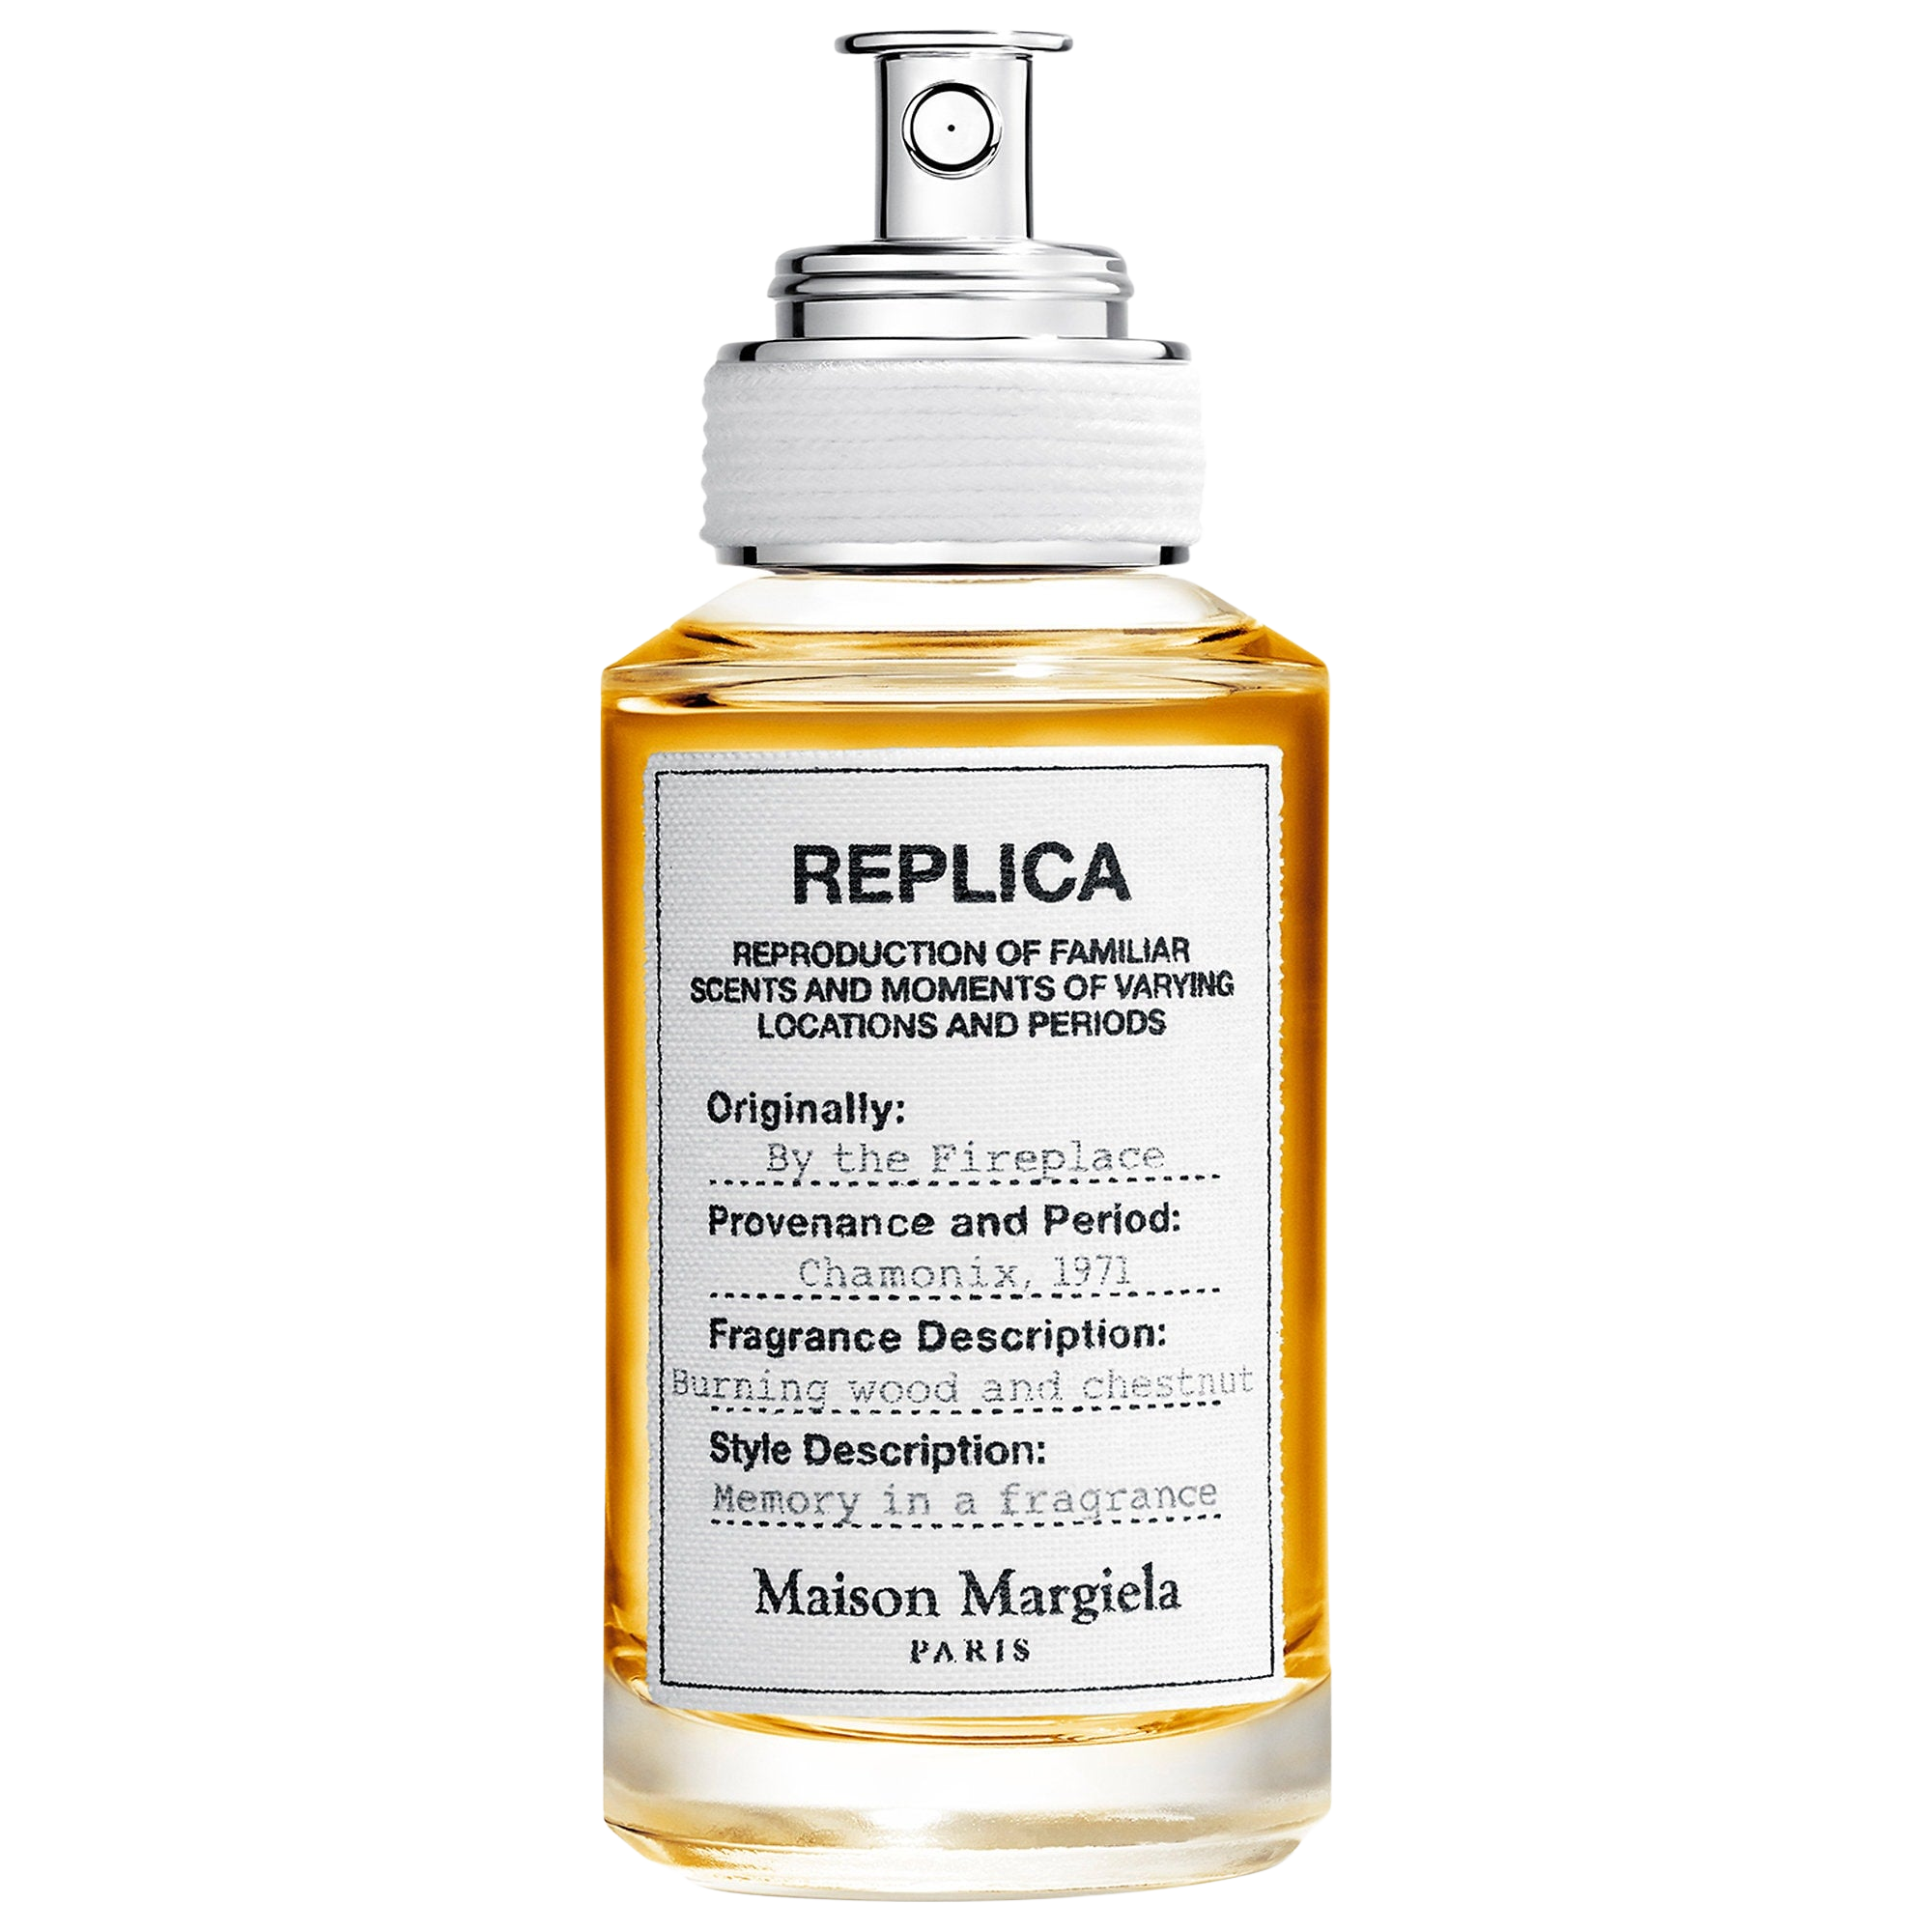 Load image into Gallery viewer, Maison Margiela ’REPLICA’ By the Fireplace
